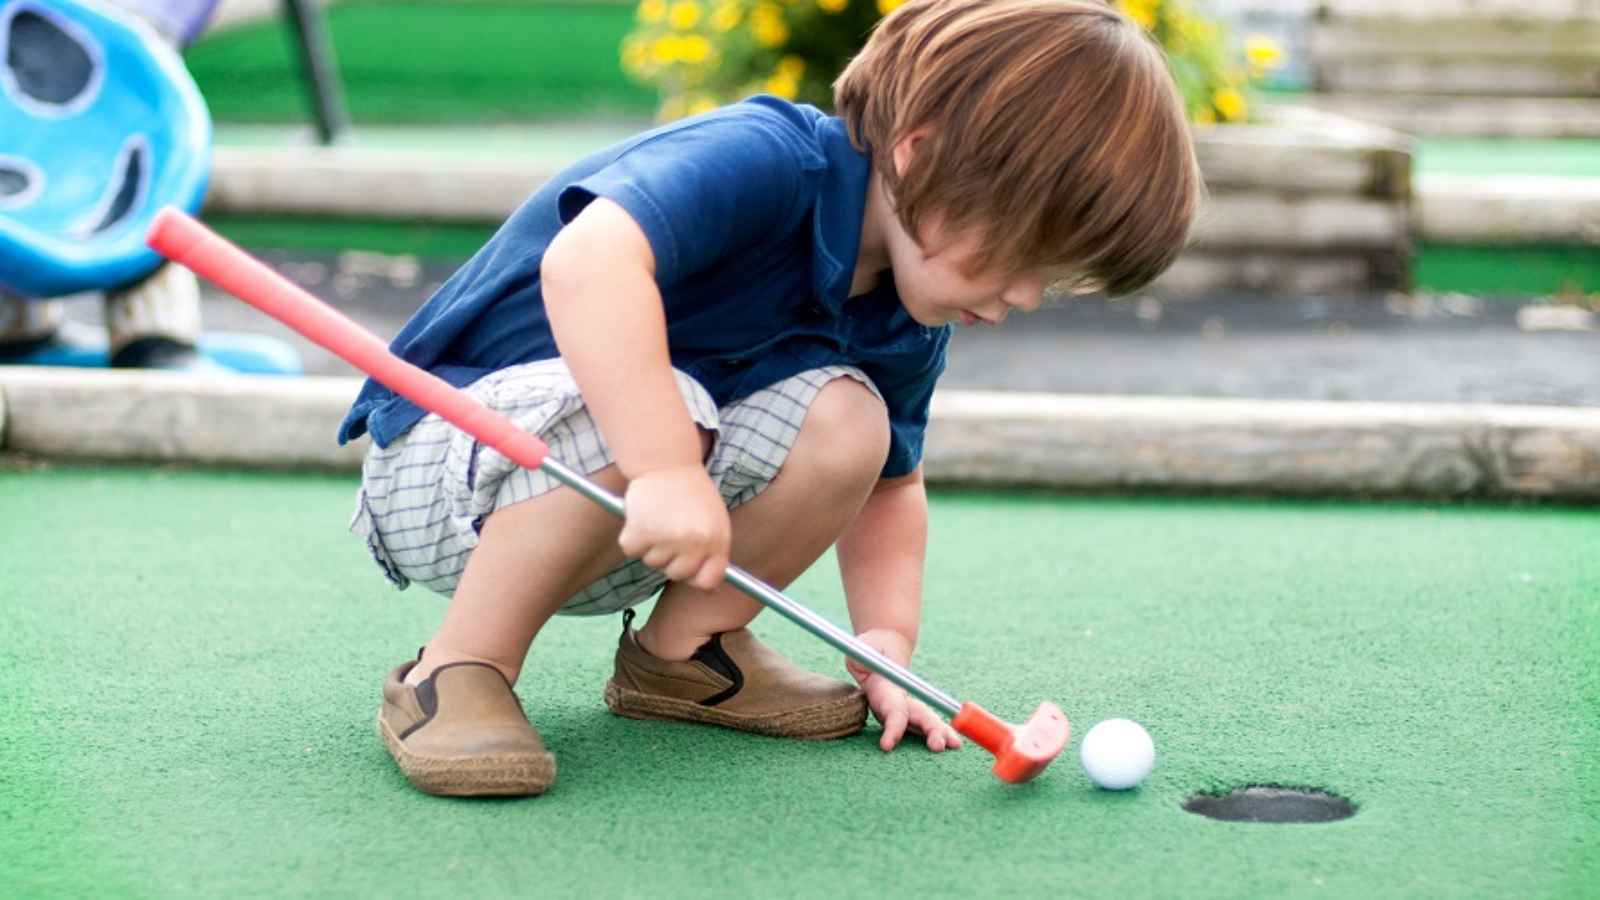 National Miniature Golf Day 2023: Date, History, Facts, Activities